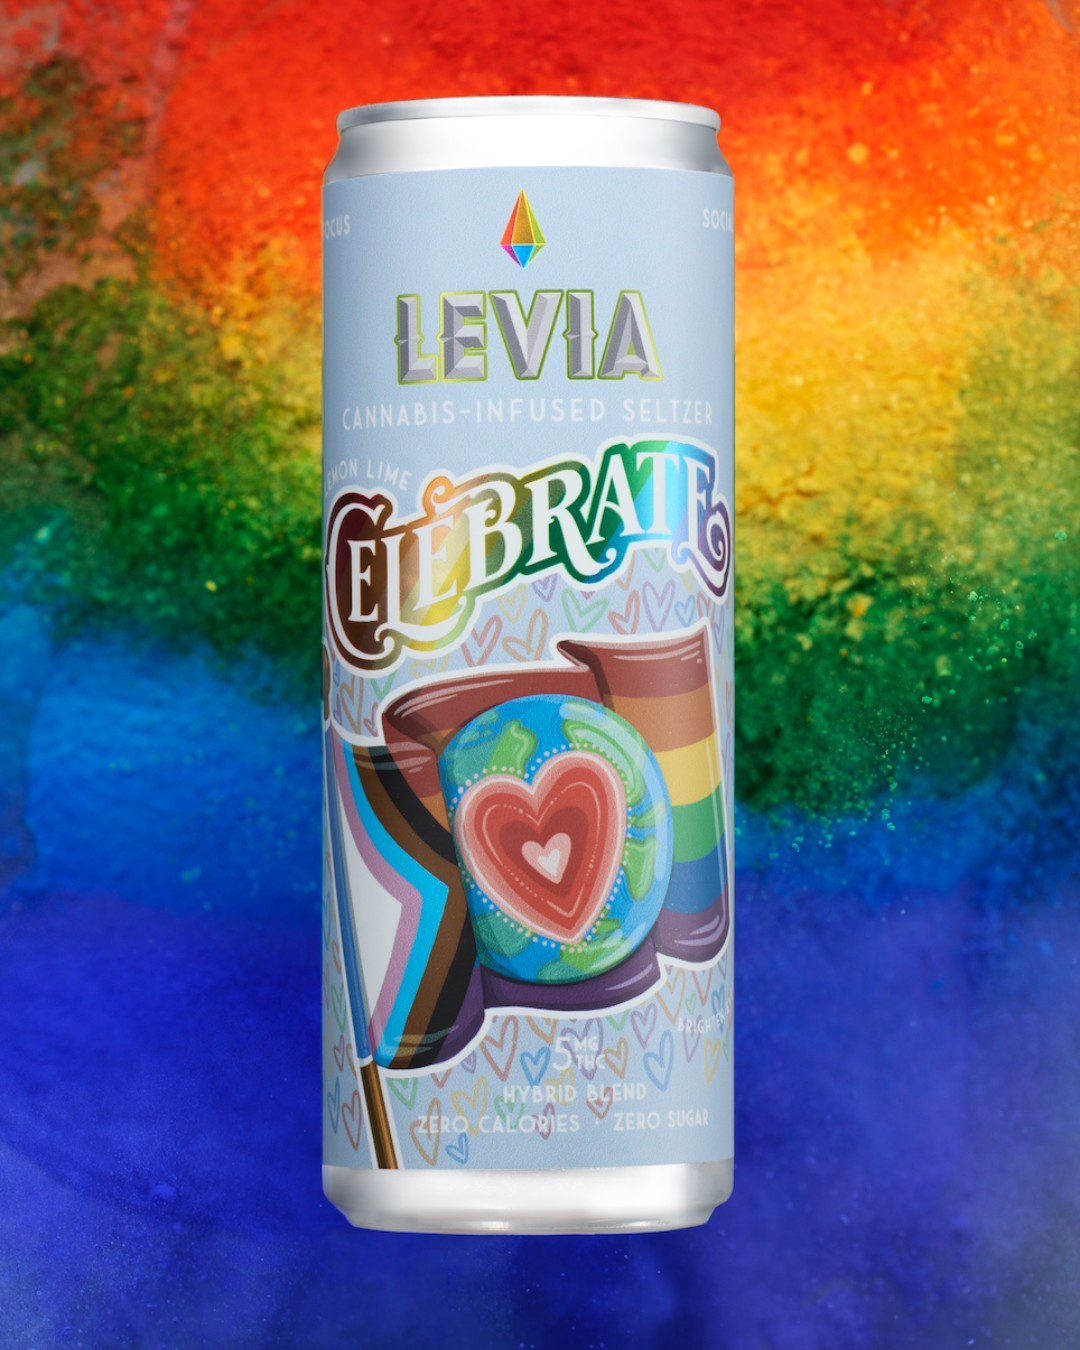 Happy PrideMonth We are proud to announce the debut of our latest limited edition offering in honor of PRIDE month Hitting shelves throughout Massachusetts for the month of June the limited edition pride can features original artwork from haileybonia of flourishartistic In addition we will be making a donation to transemergencyfund during their Trans Pride A Celebration of Liberation event The donation will help provide homeless transgender individuals within the state with temporary housing for a year accompanied by staff to oversee and support the program by providing resources for members as they work to secure their own employment and housing in the future Our PRIDE edition mimics the effects of Celebrate an uplifting elevated experience with our flagship lemon lime flavor craigcapellophotography